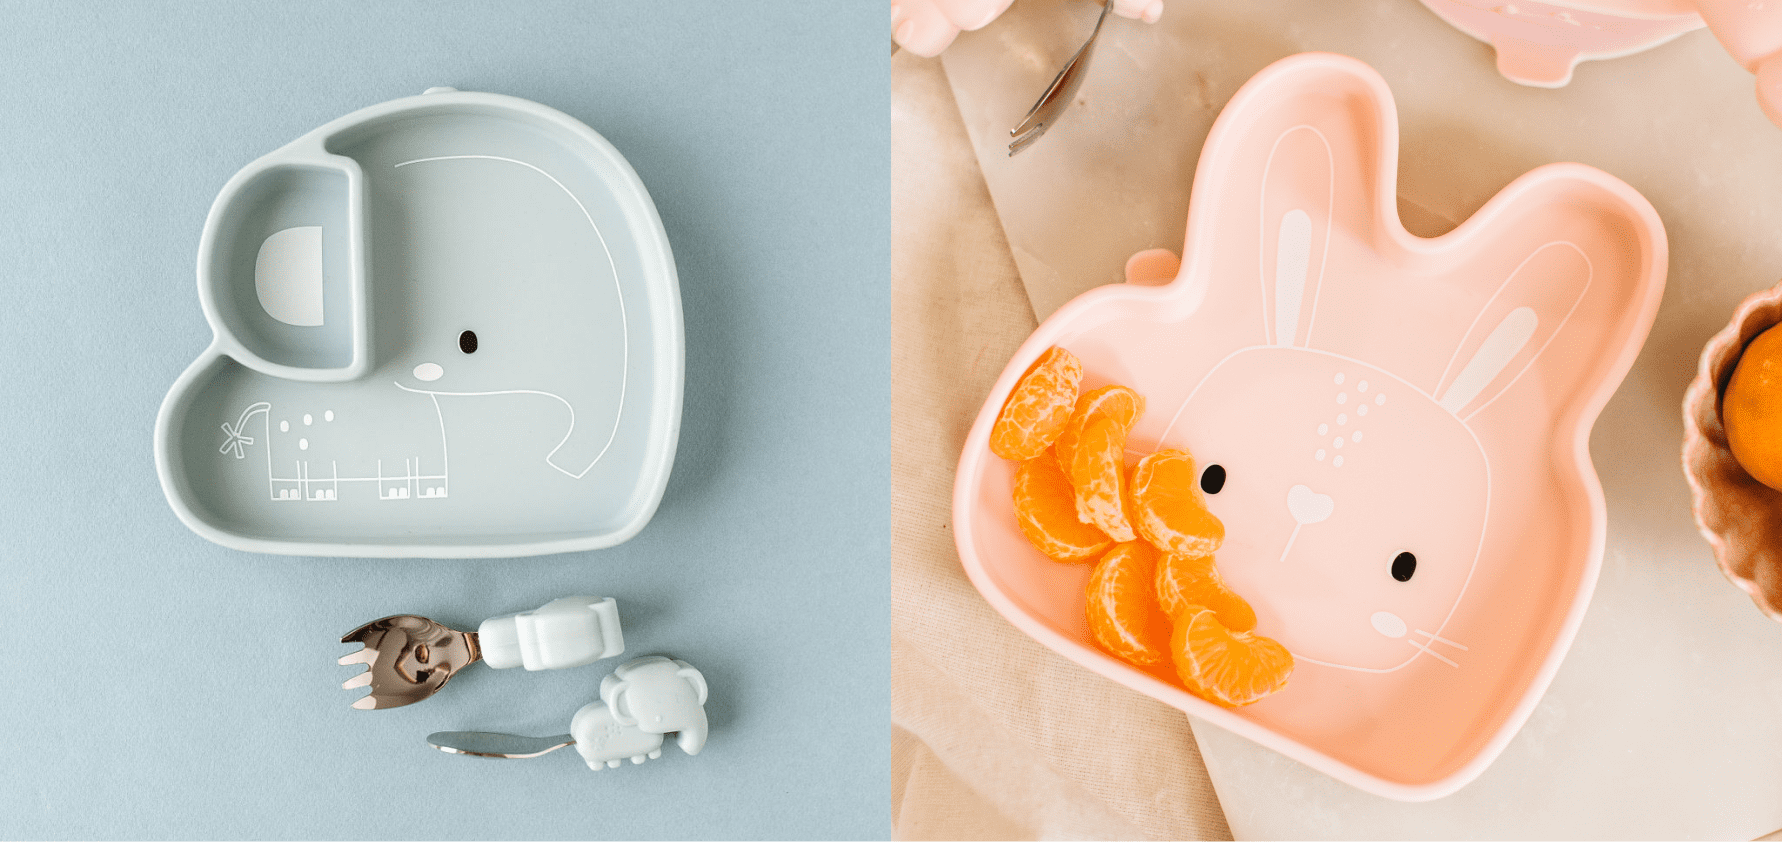 Infant eating bowls and utensils from Loulou Lollipop. One bowl is in the shape of a grey elephant. The other bowl is in the shape of a pink bunny. 